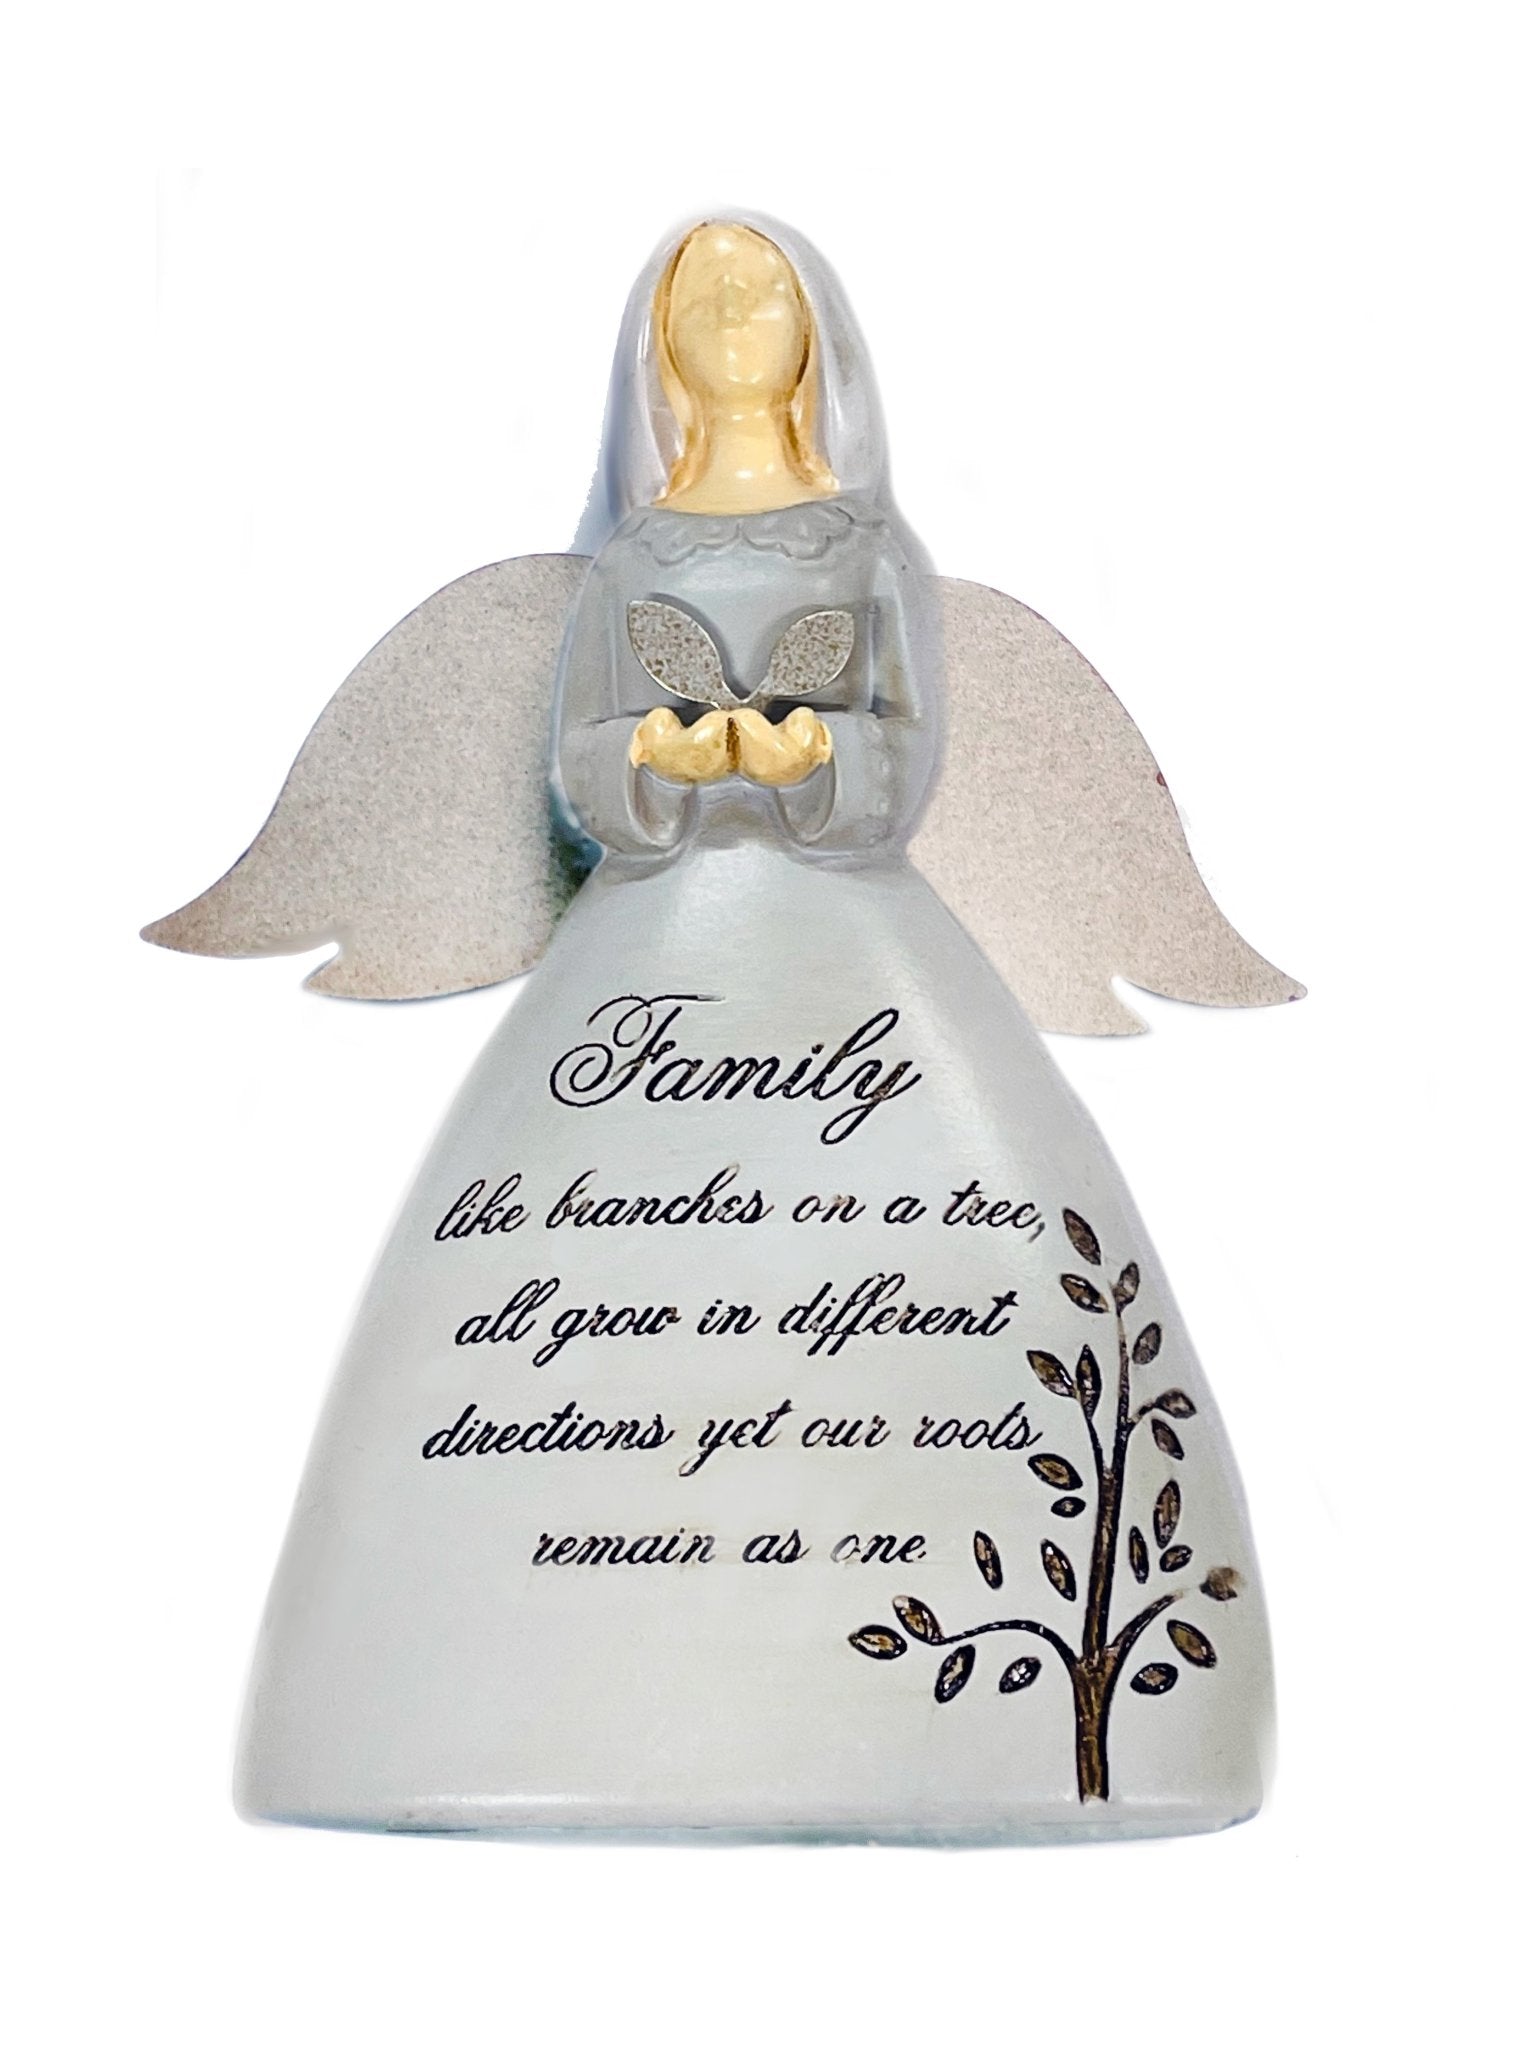 In Memory of Family Small Angel Figurine - Celebrate Prints